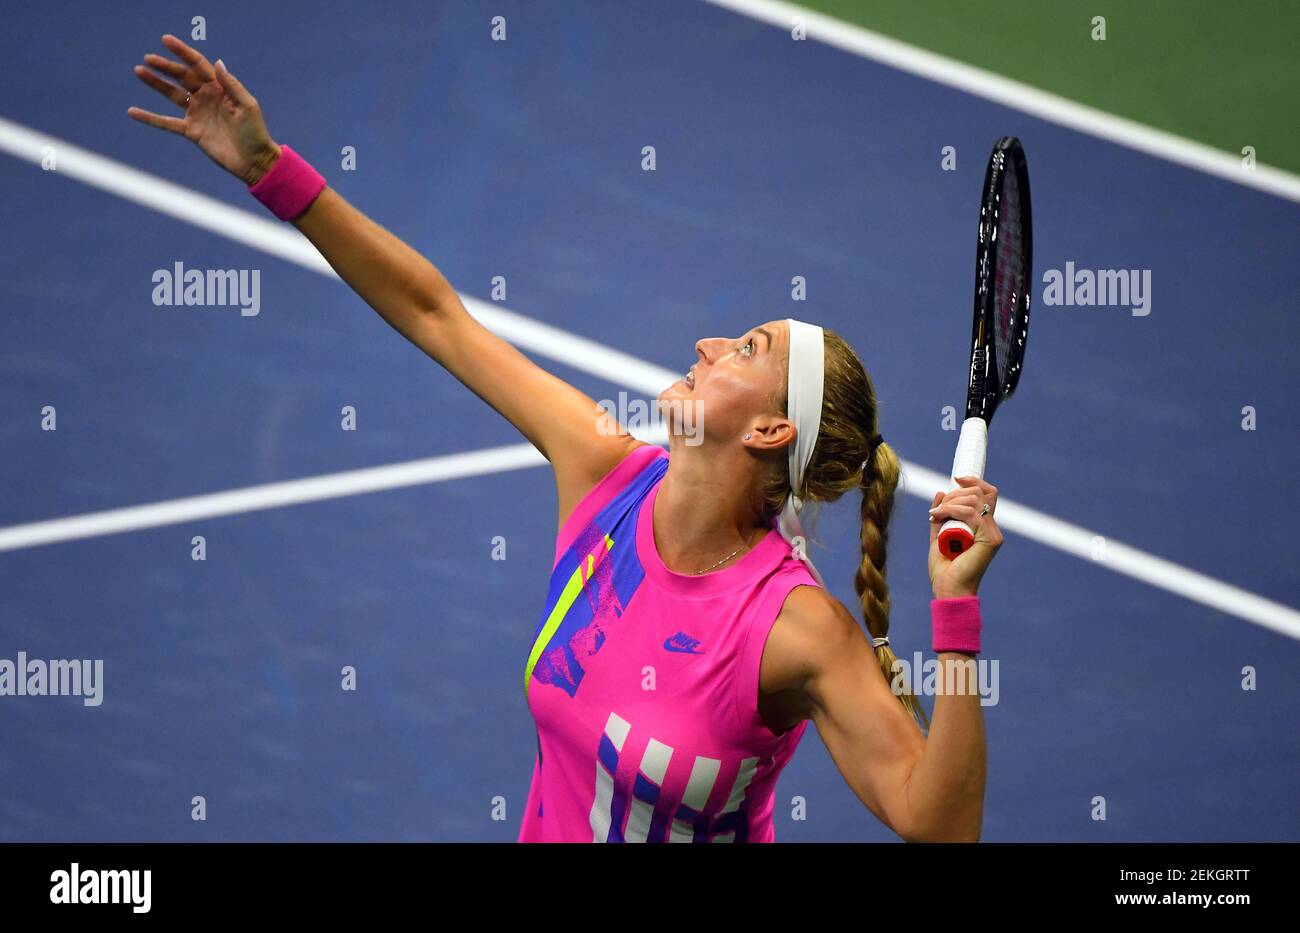 Sep 4, 2020; Flushing Meadows, New York, USA; Petra Kvitova of Czech  Republic serves the ball against Jessica Pegula of the United States on day  five of the 2020 U.S. Open tennis